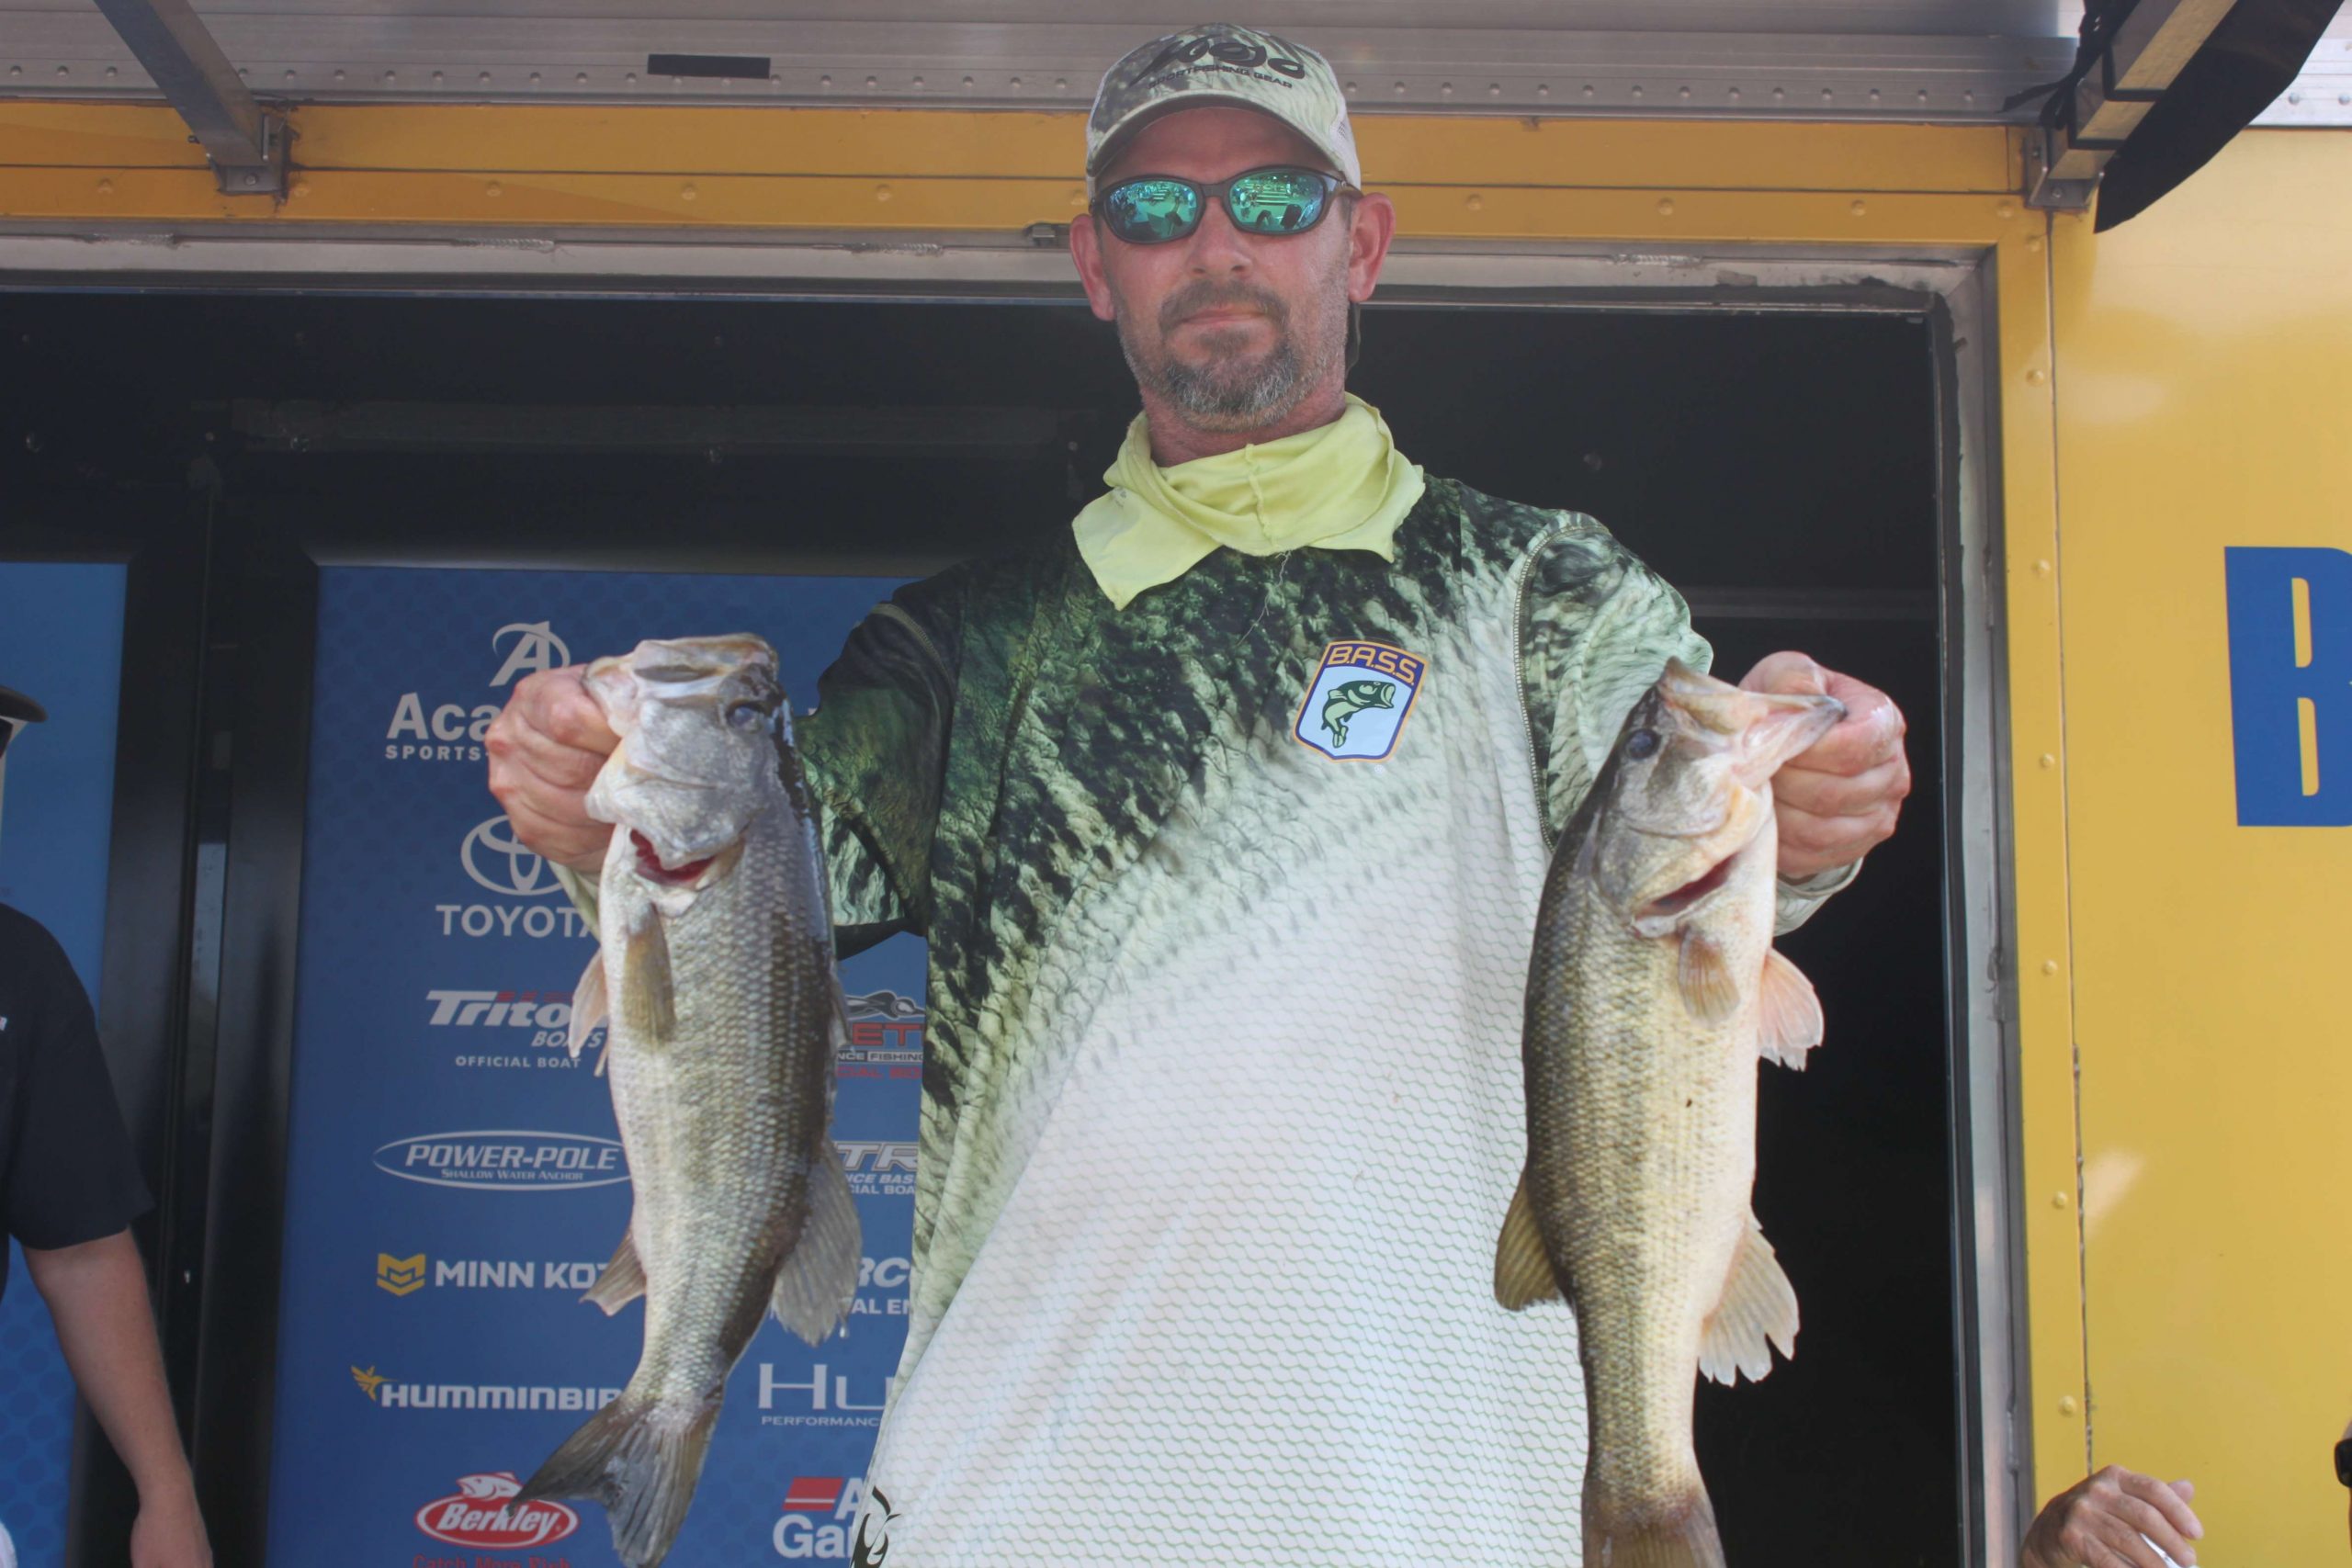 David Boyd of Florida is in fifth place among boaters with 10-12.